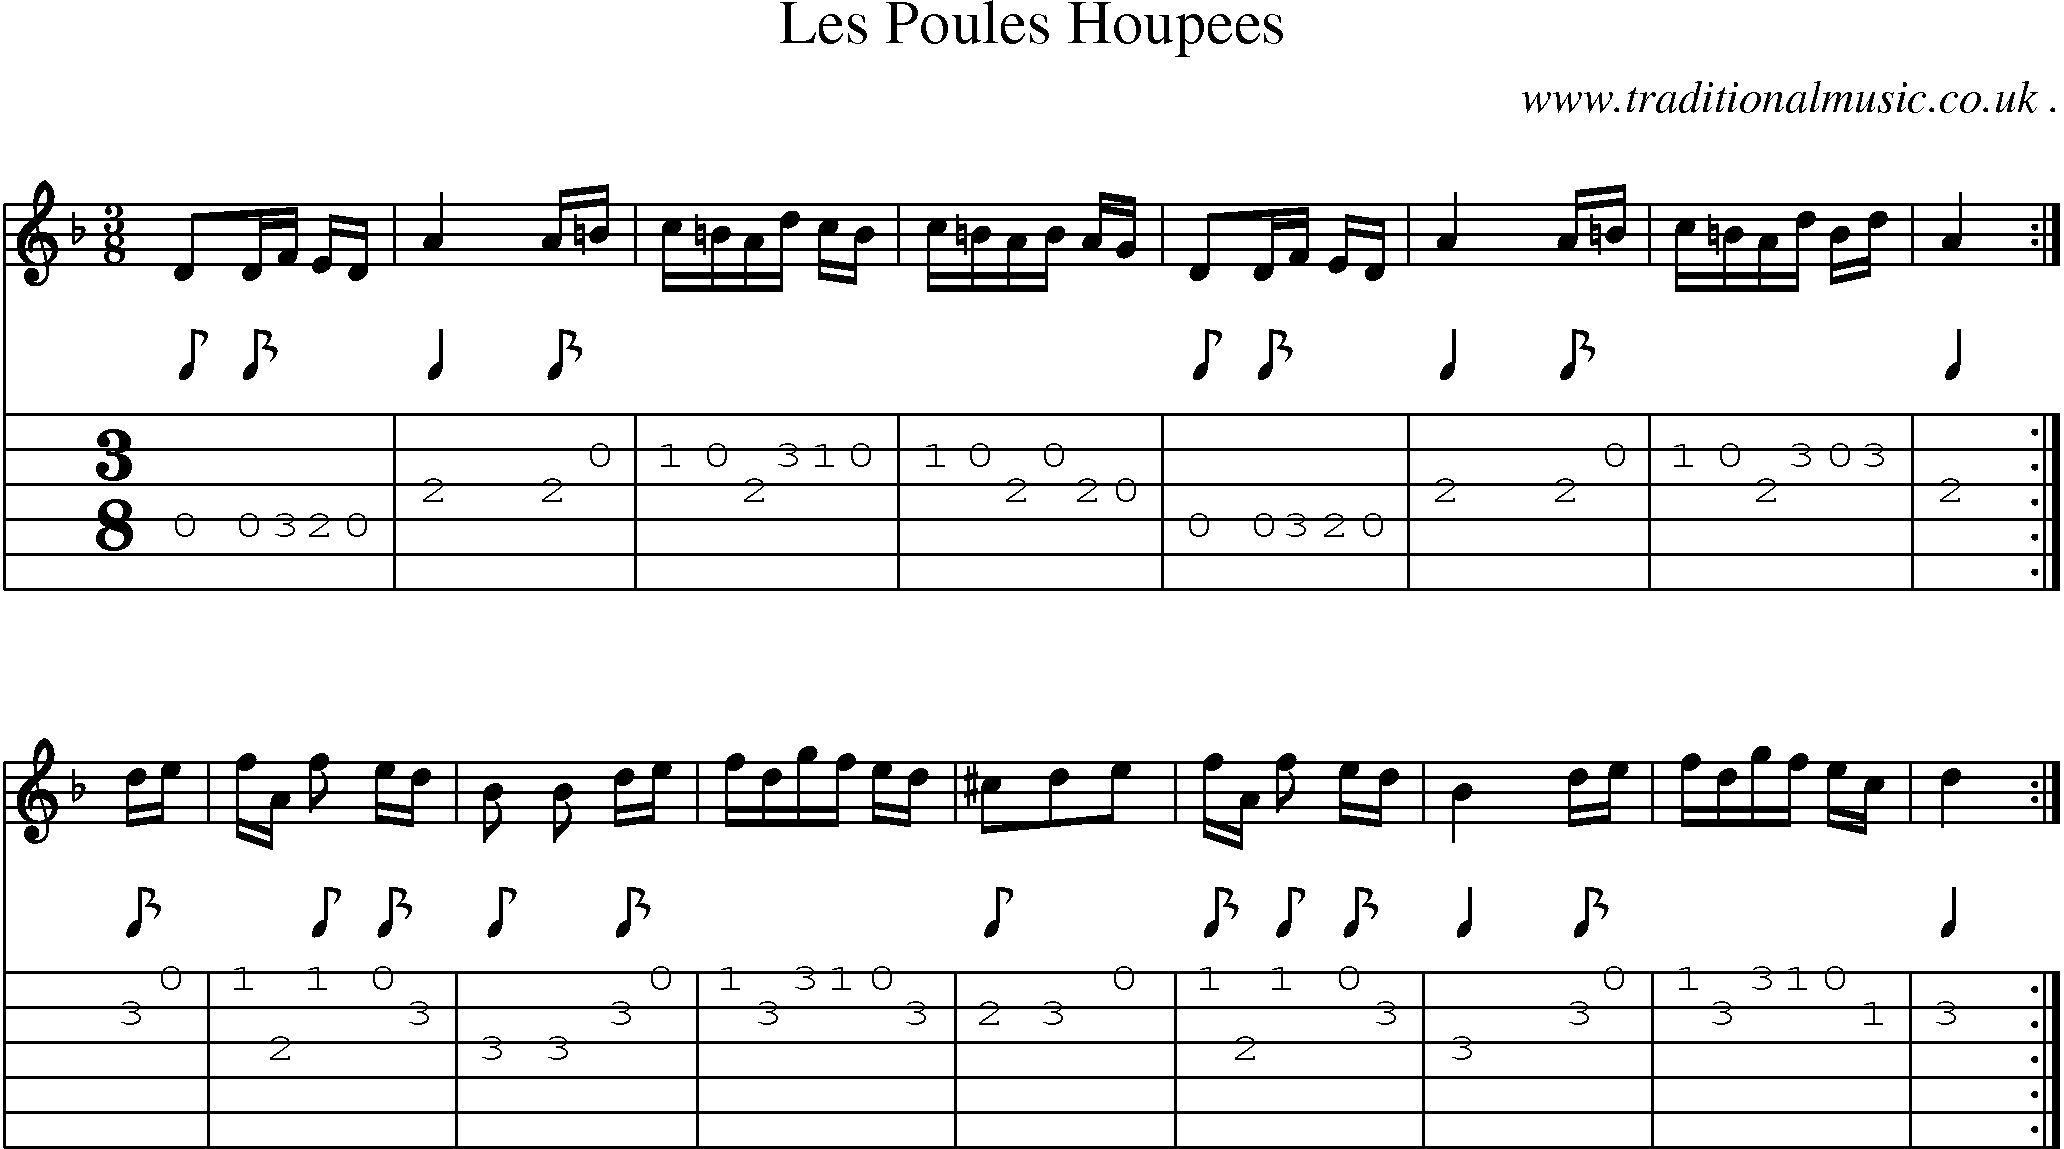 Sheet-Music and Guitar Tabs for Les Poules Houpees